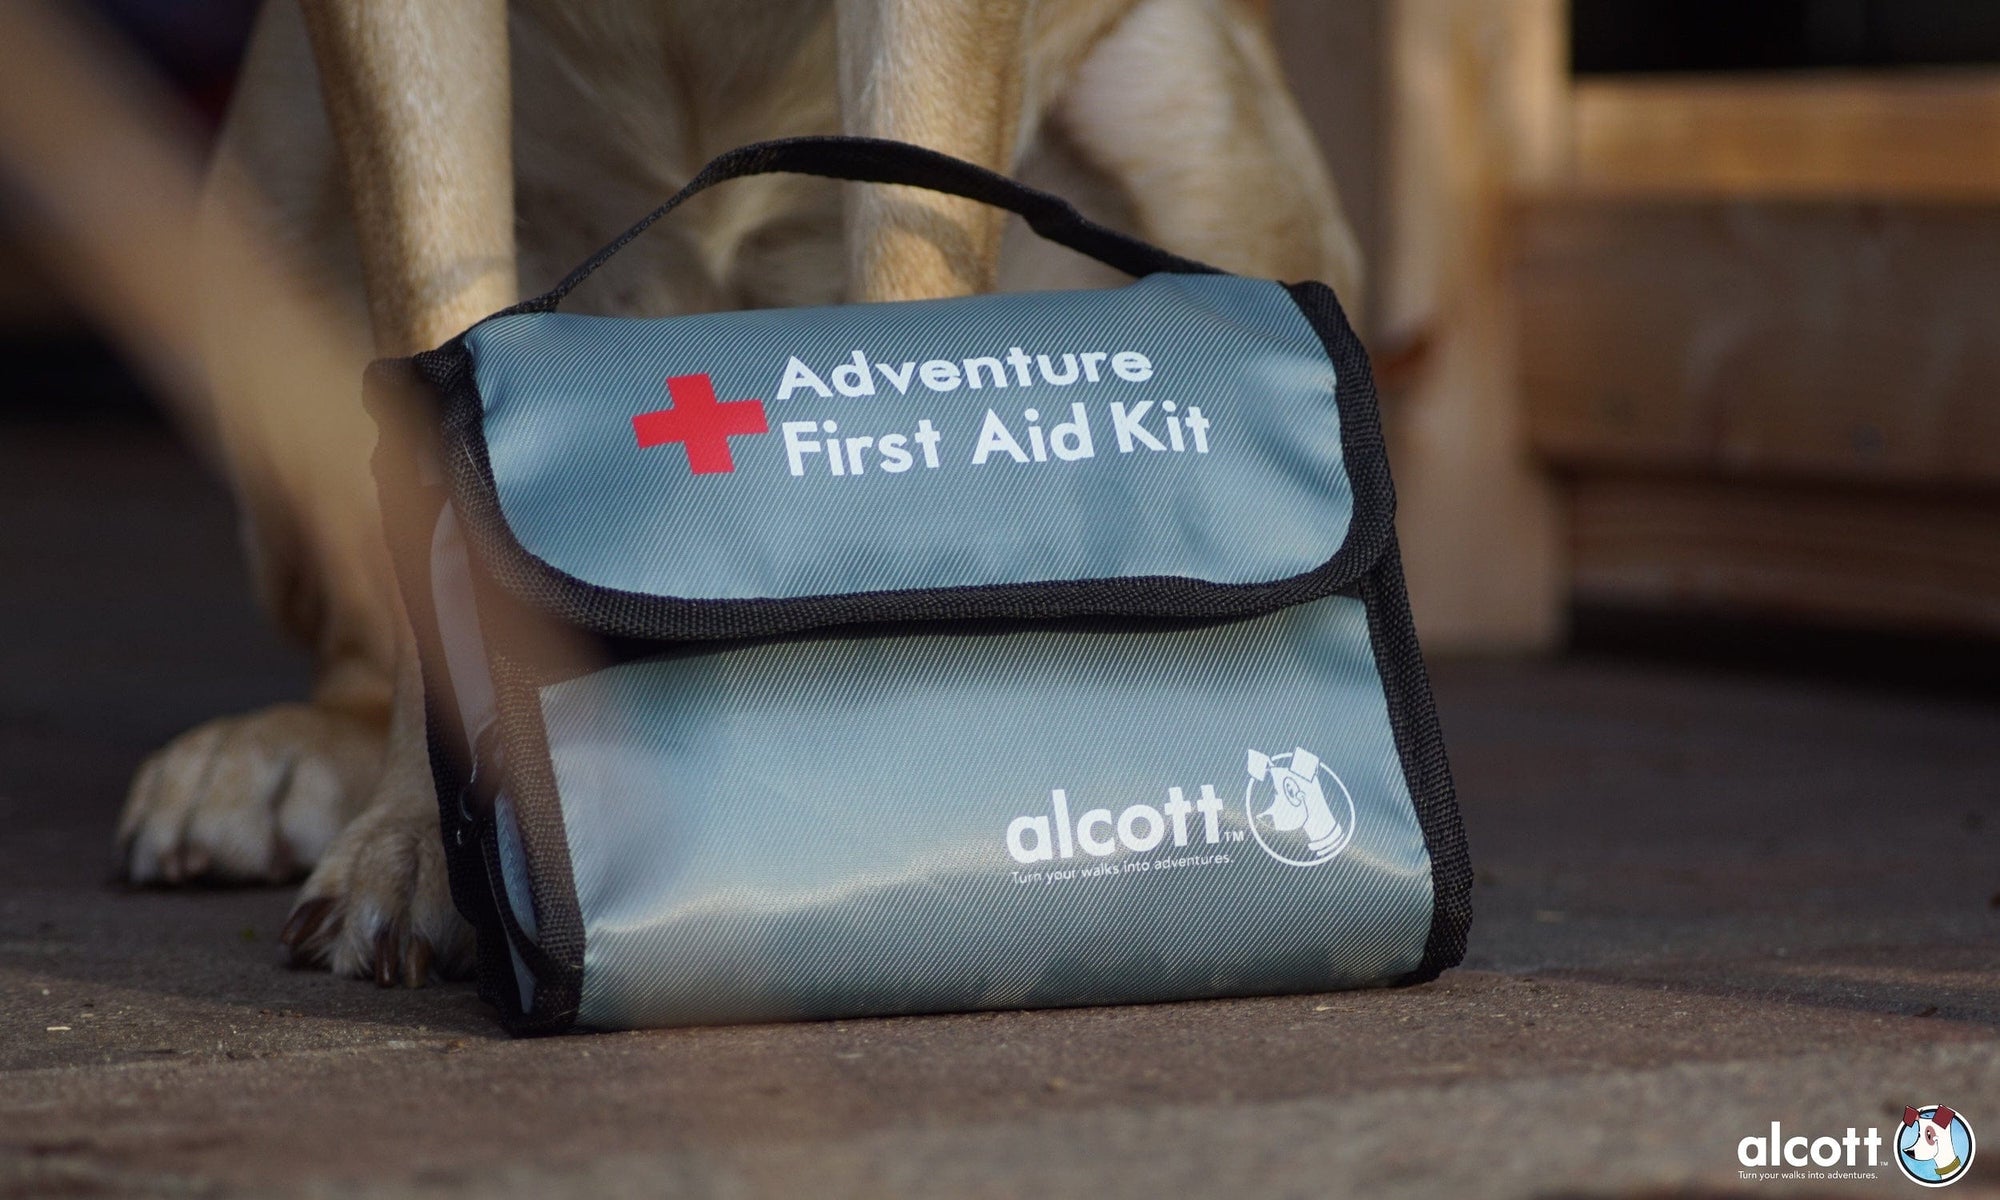 Alcott products adventure first aid kit